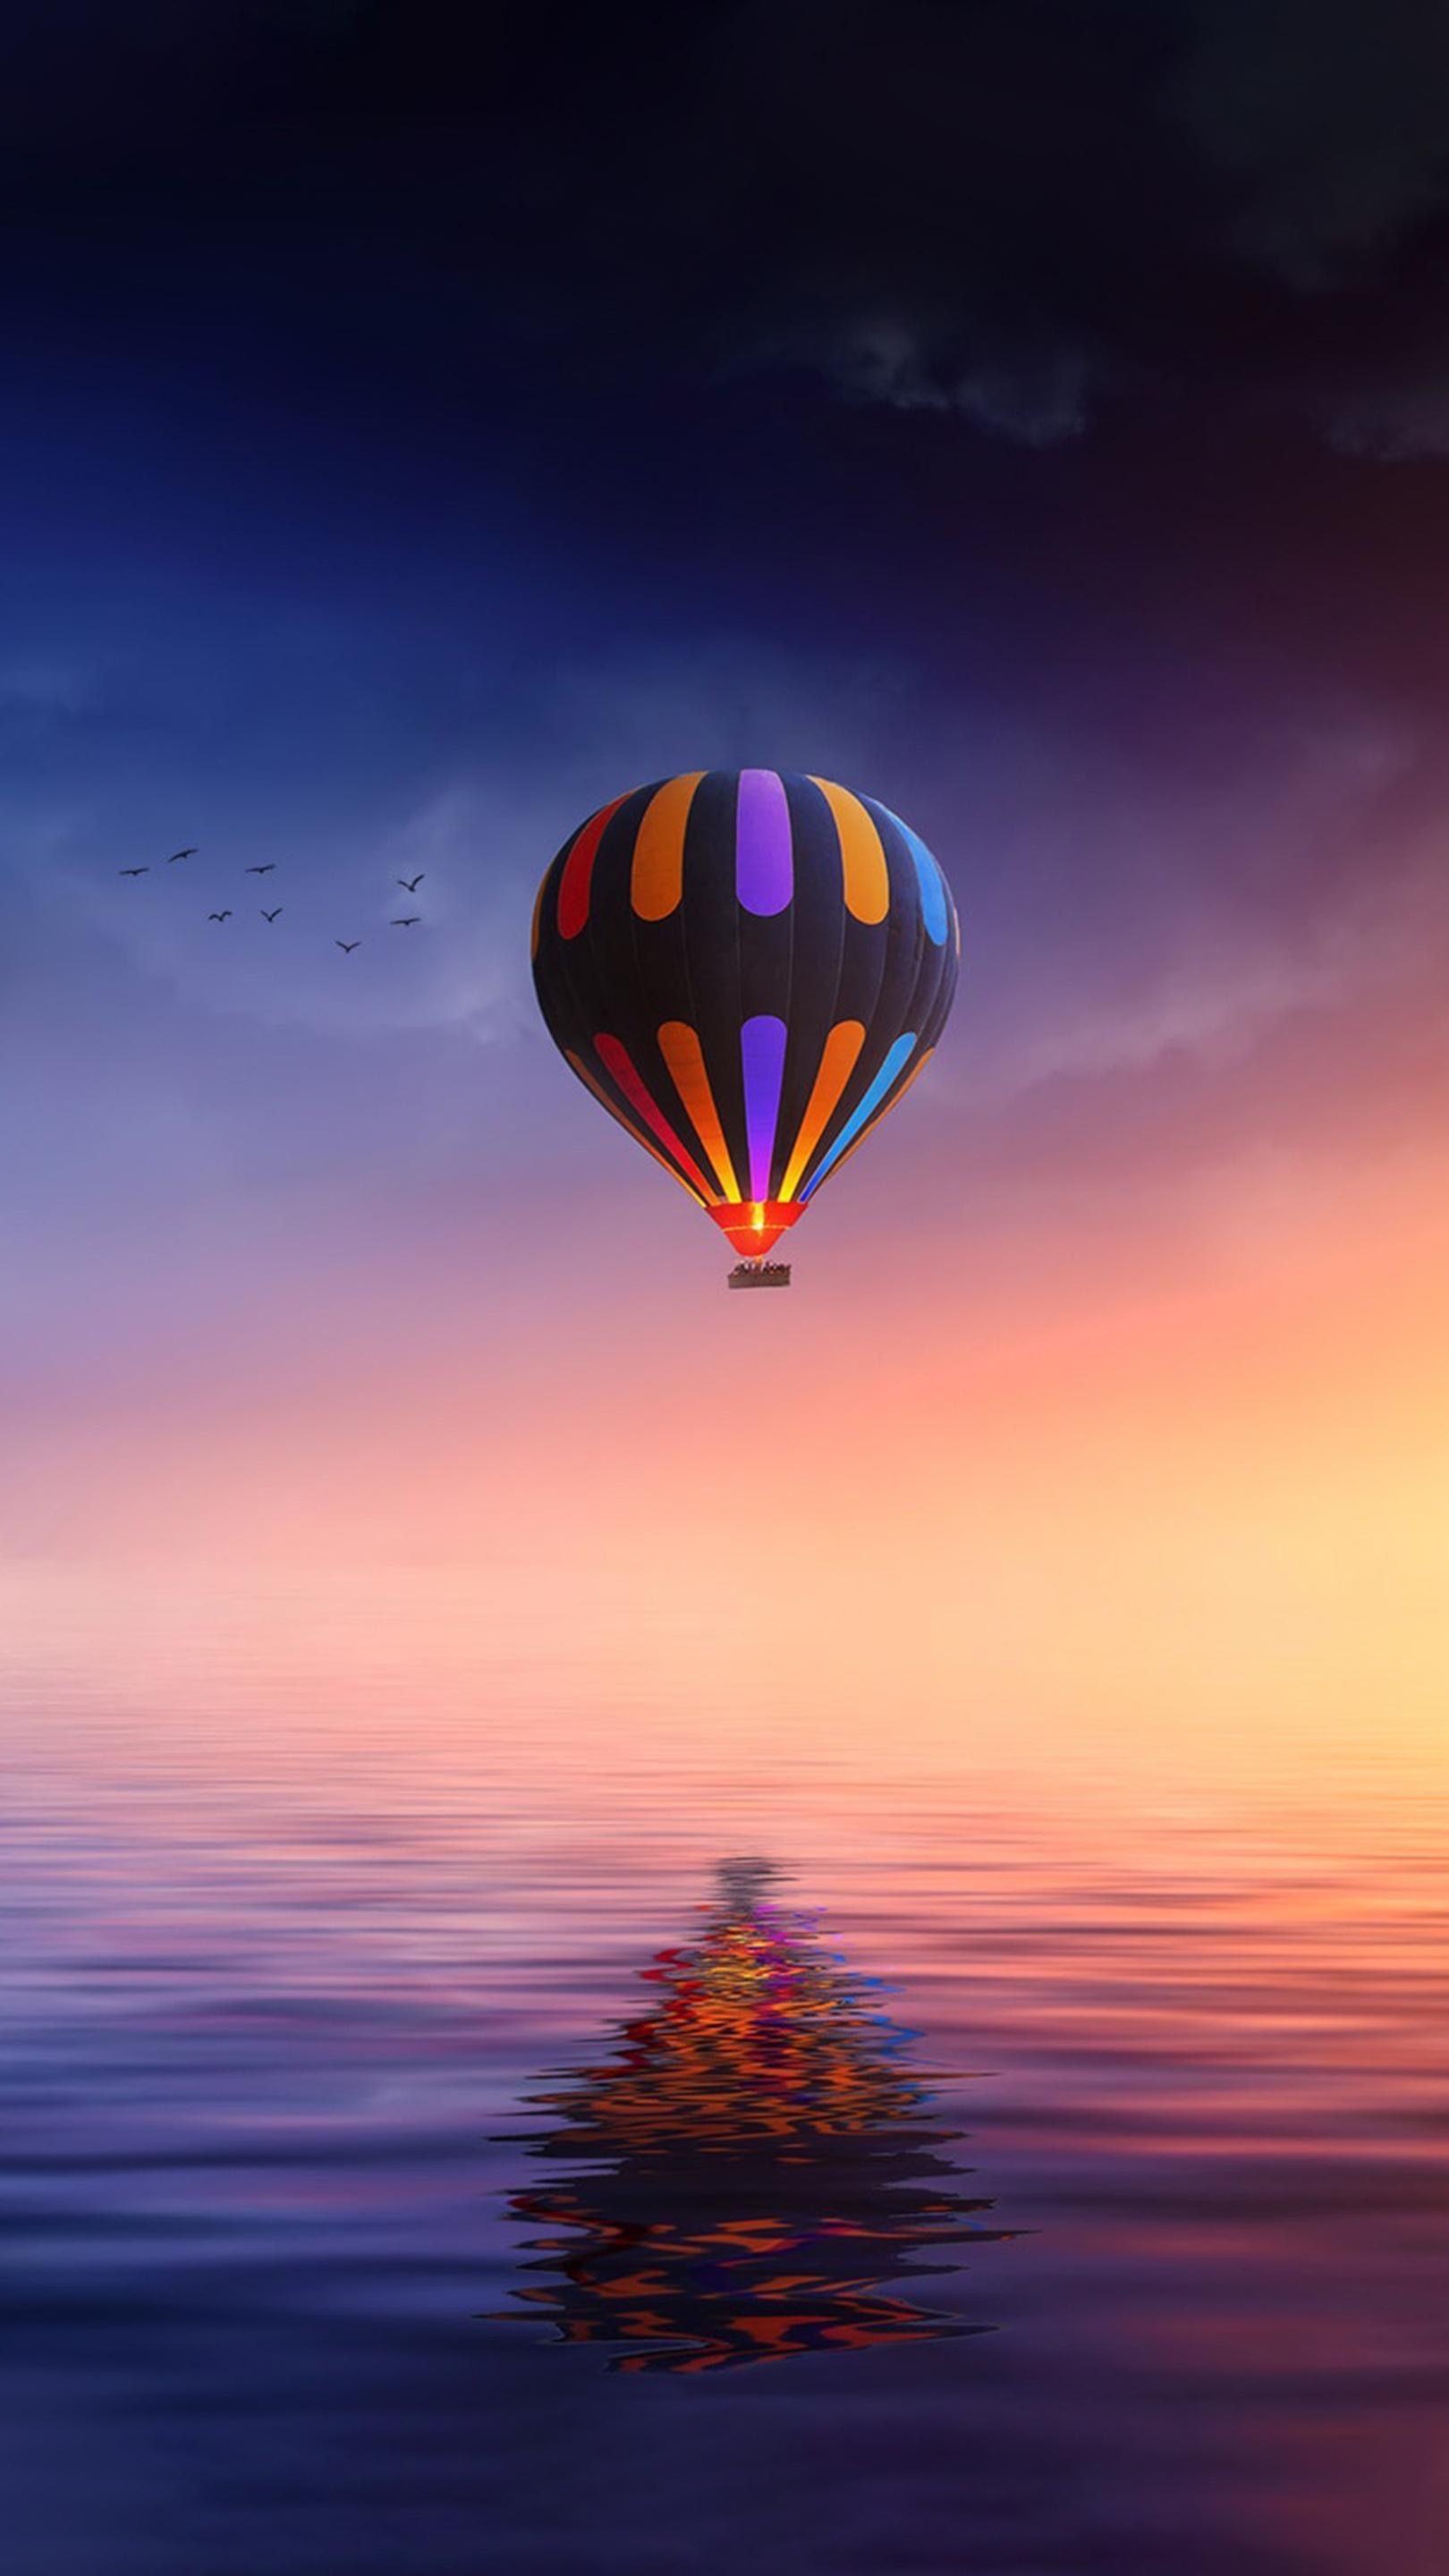 A colorful hot air balloon flying over the sea - Hot air balloons